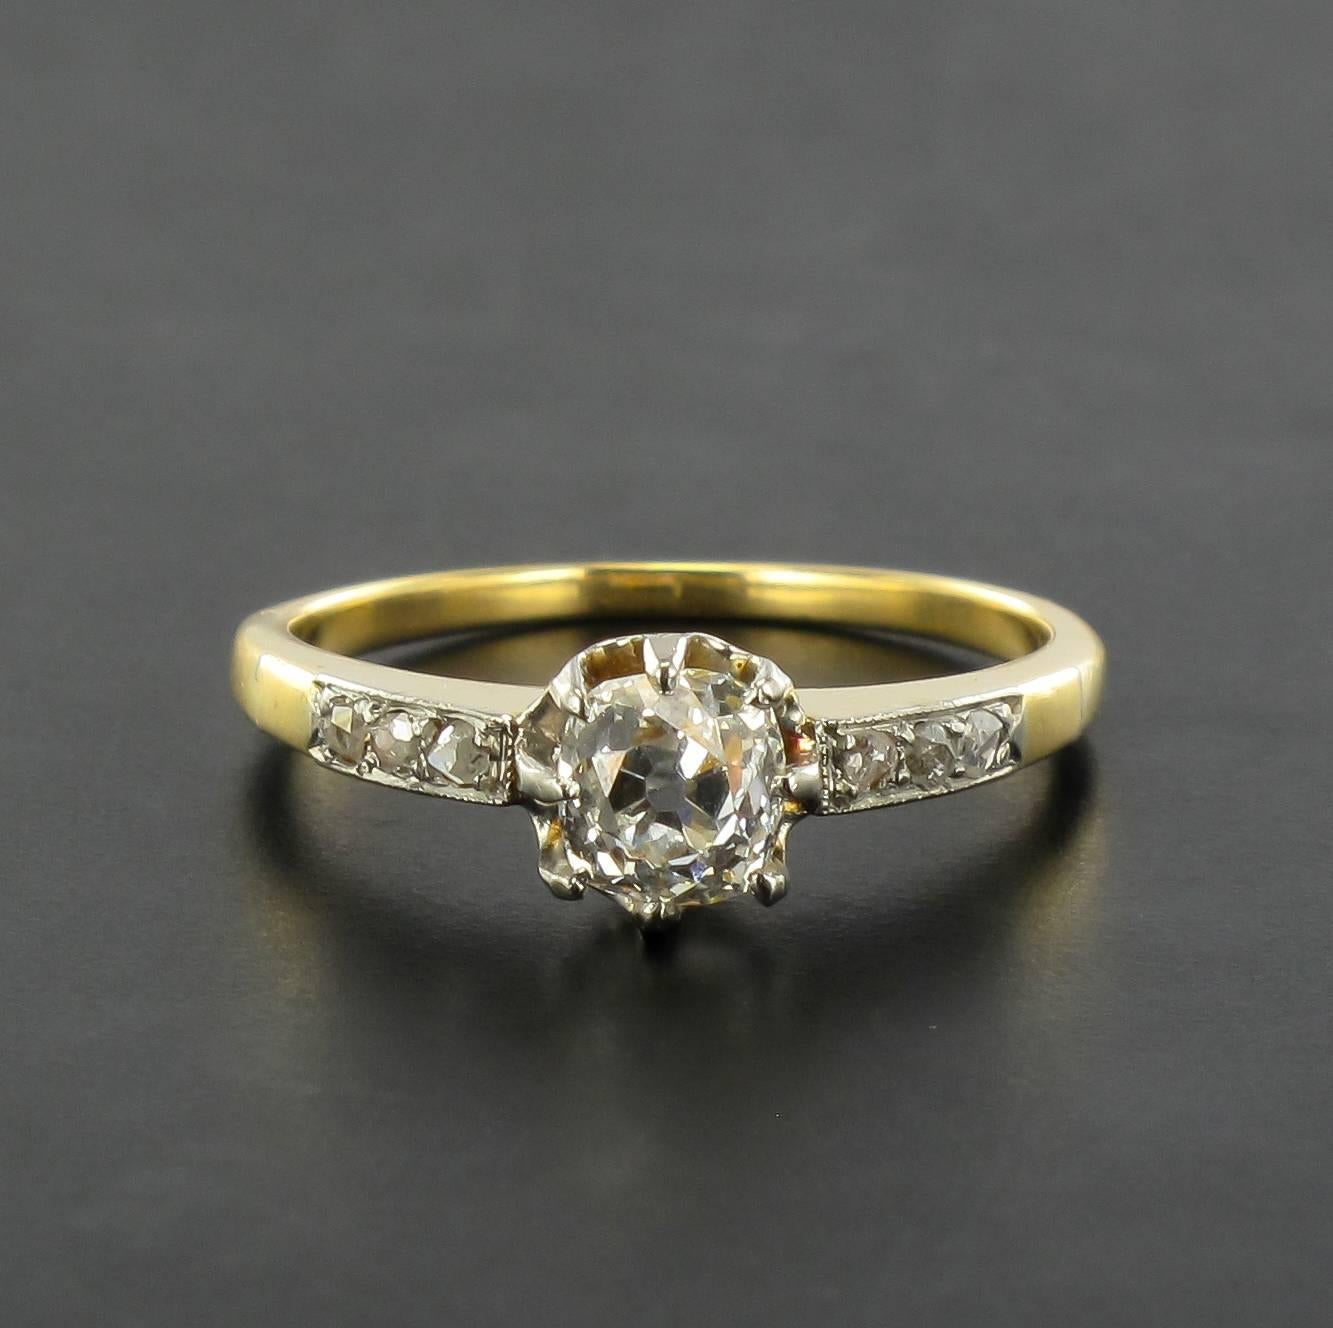 Ring in 18 carat yellow gold, eagle head hallmark. 

This fabulous antique ring is claw set with an antique cushion cut diamond with 3 rose cut diamonds at the beginning of the ring band. 

Weight of the central diamond: about .90 carat.